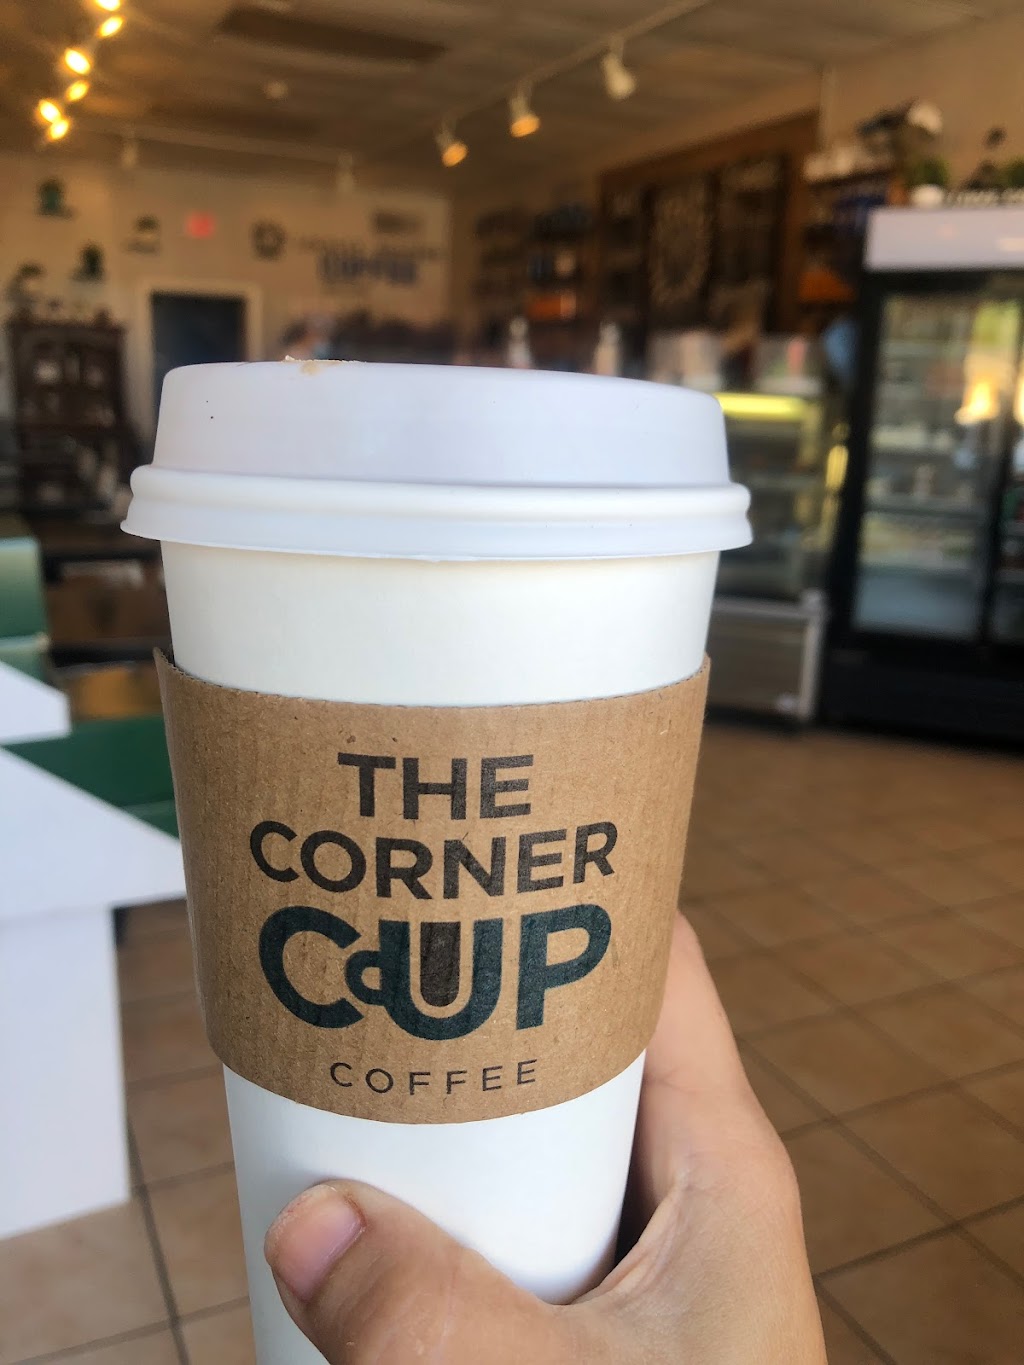 The Corner Cup Coffee | 2625 Lawrenceville Hwy, Decatur, GA 30033 | Phone: (770) 674-5721